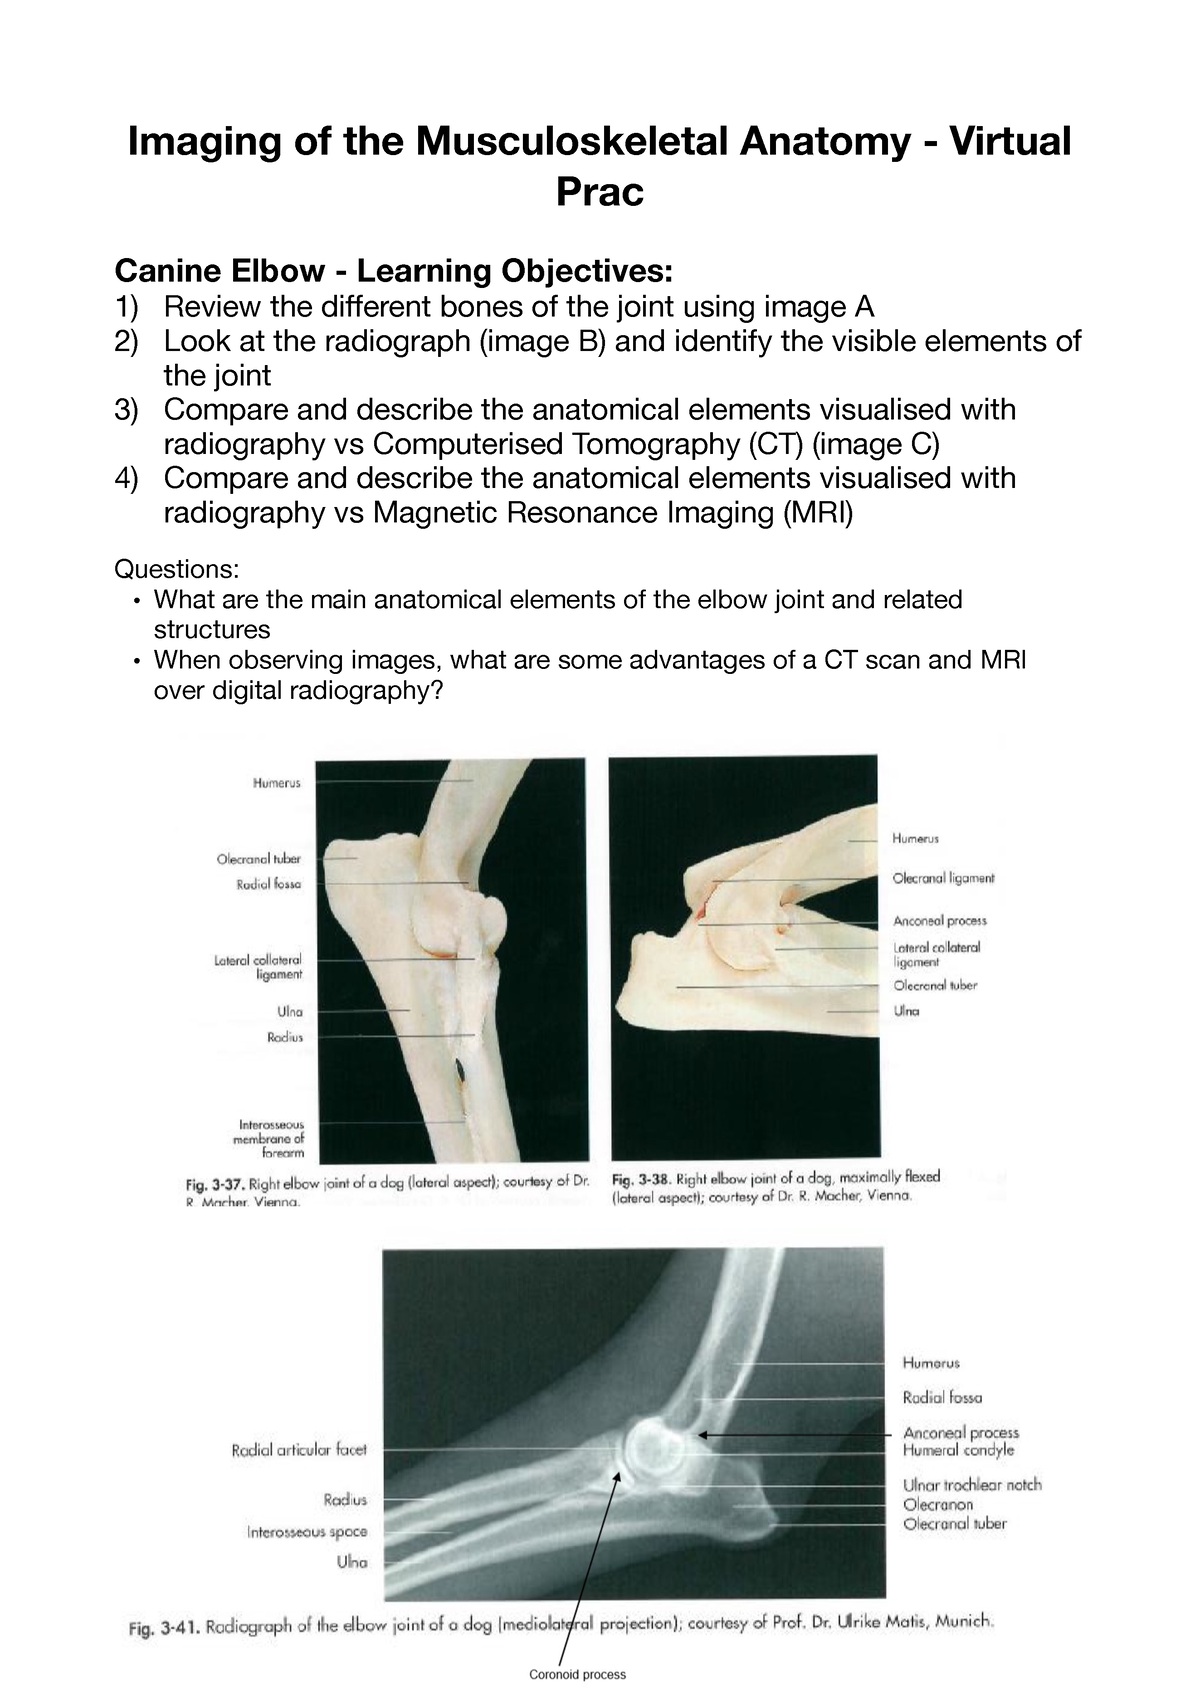 Imaging of the Musculoskeletal Anatomy - V. Prac - Imaging of the ...